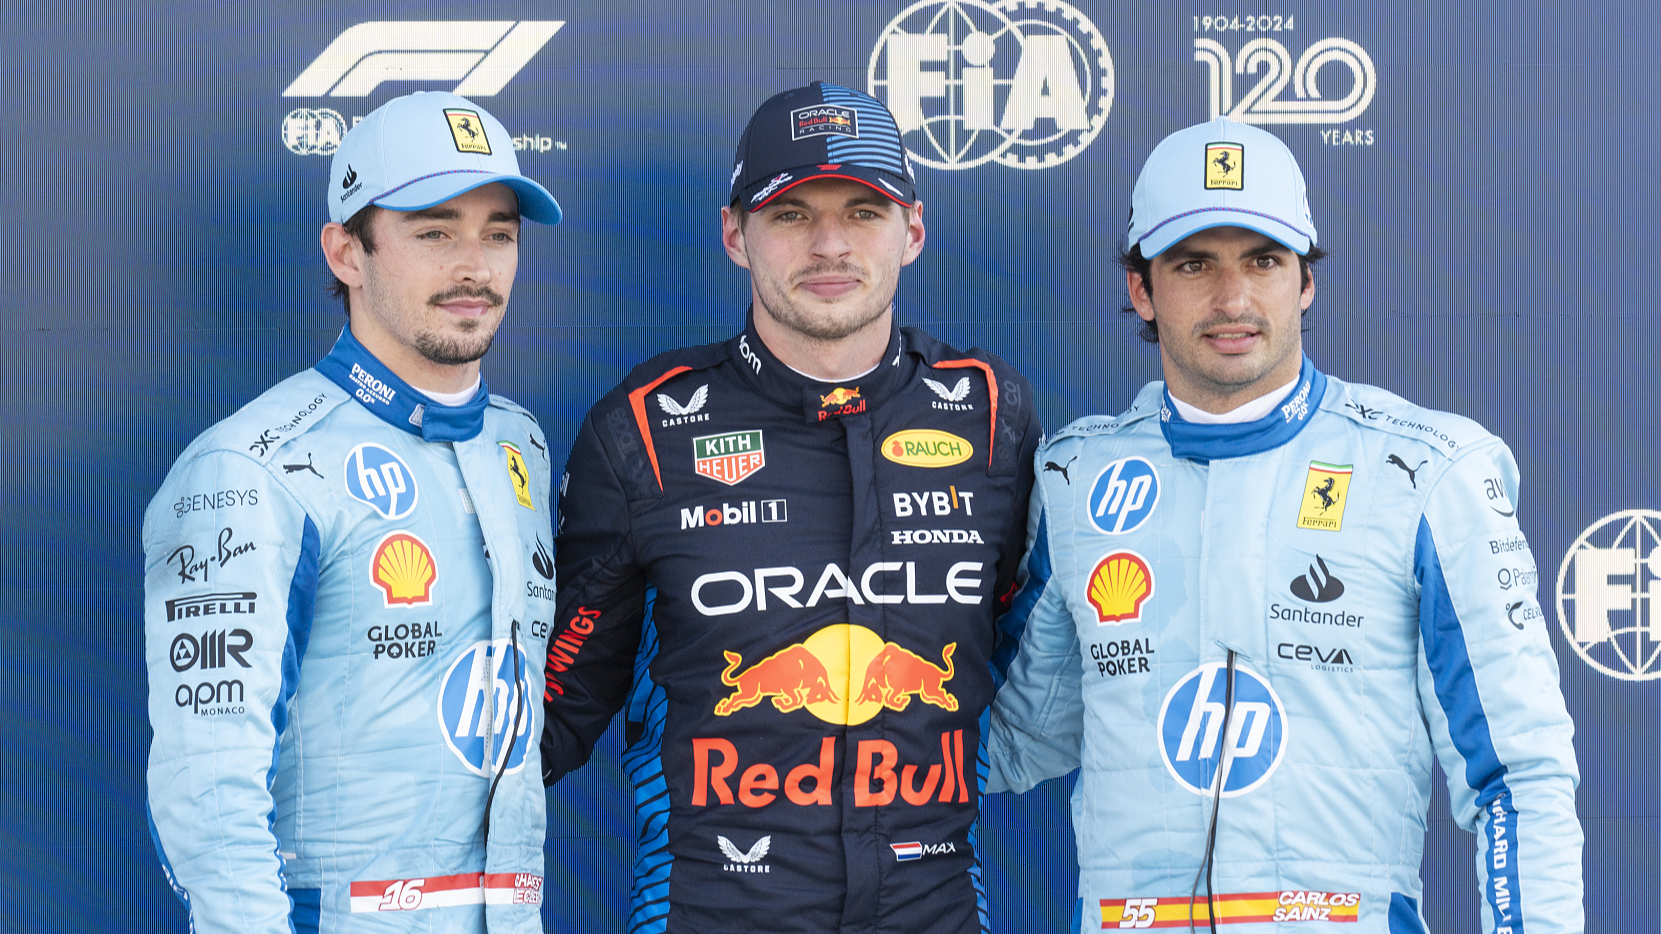 L-R: Charles Leclerc, Max Verstappen and Carlos Sainz pose for a photo after qualifying as top 3 for the Miami Grand Prix in Miami, Florida, U.S., May 4, 2024. /CFP